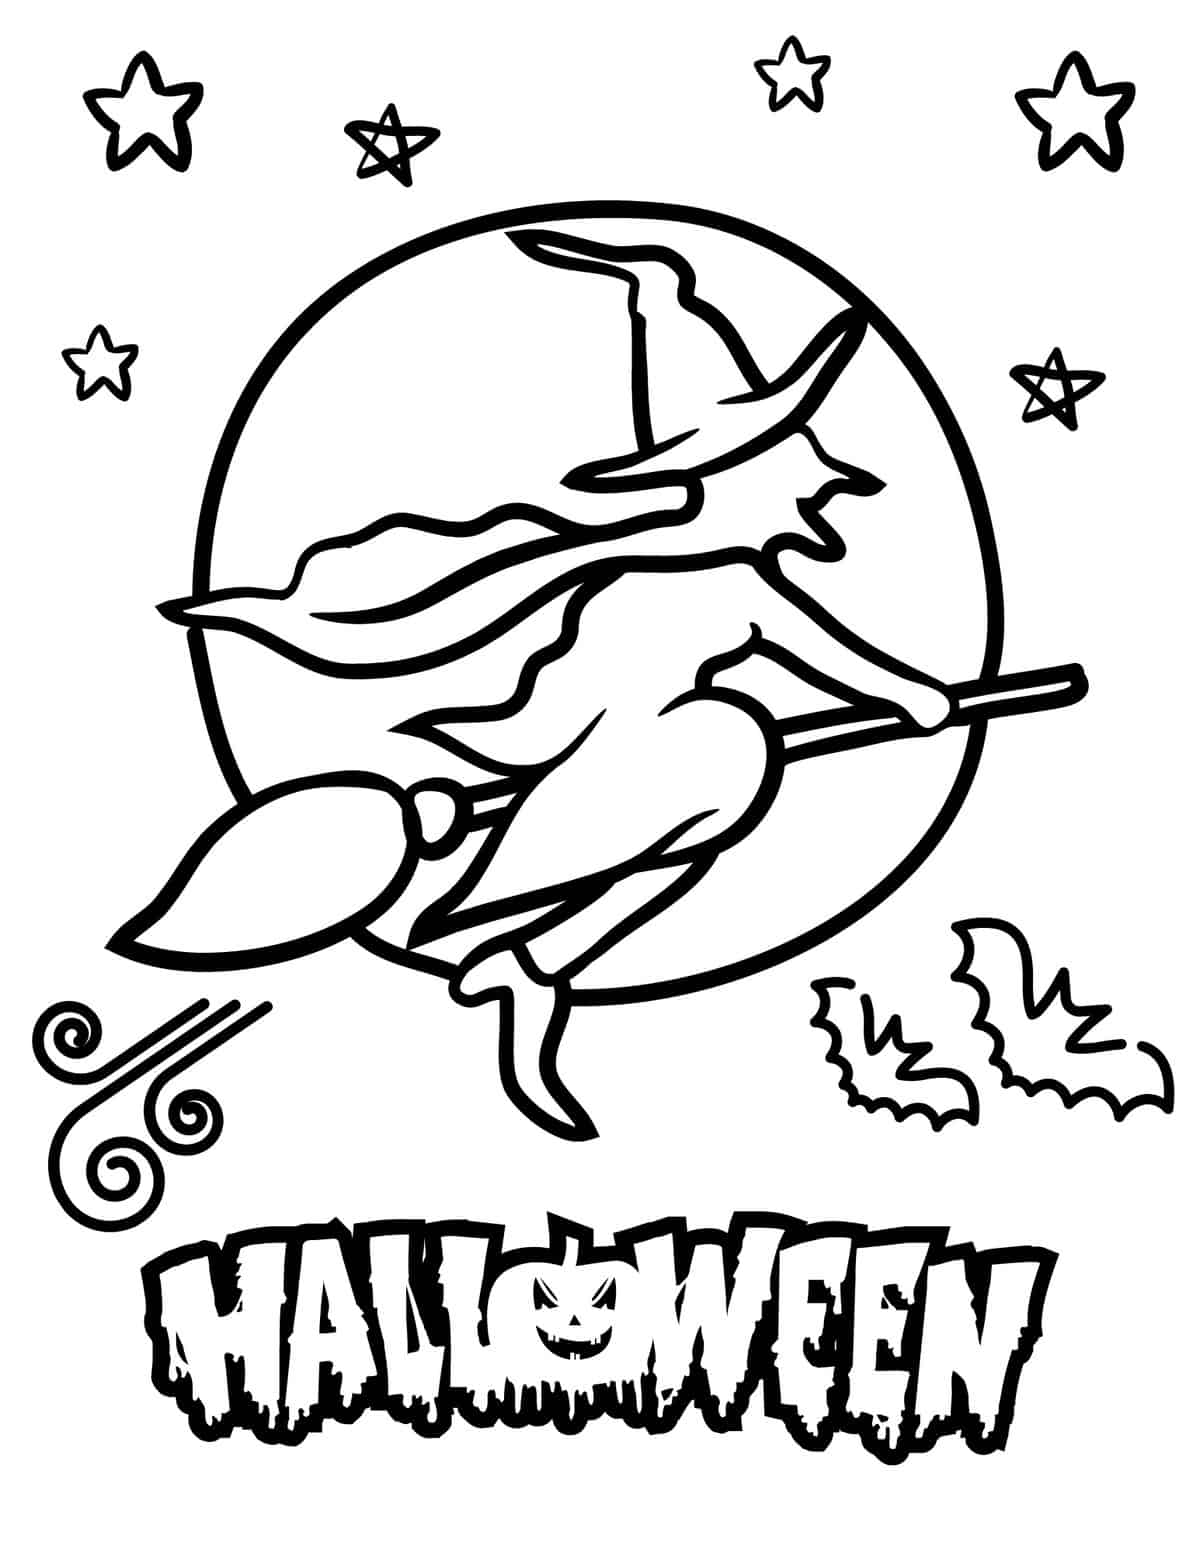 witch flying across moon coloring page